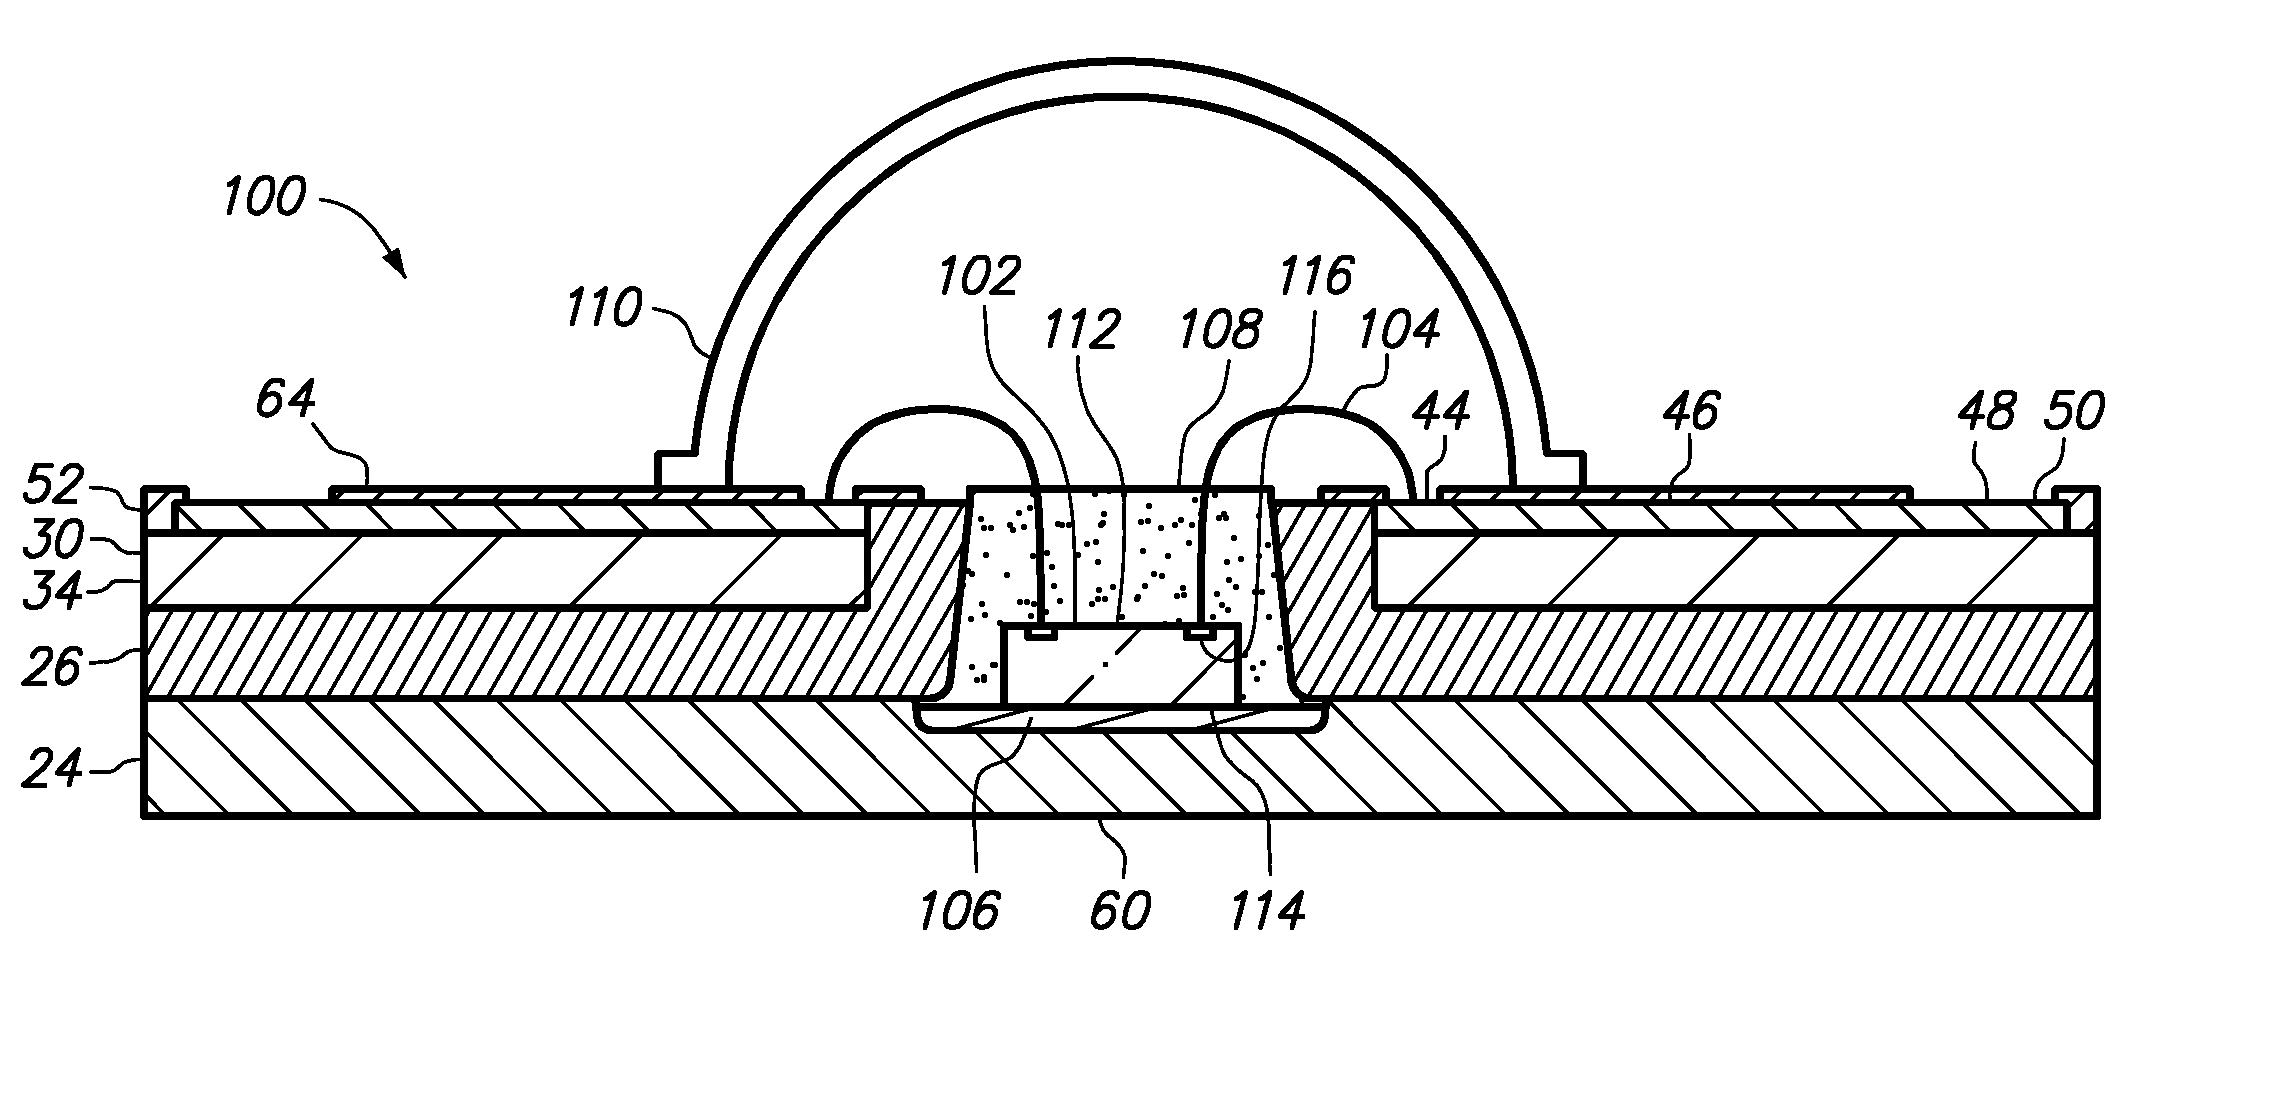 Semiconductor chip assembly with base heat spreader and cavity in base